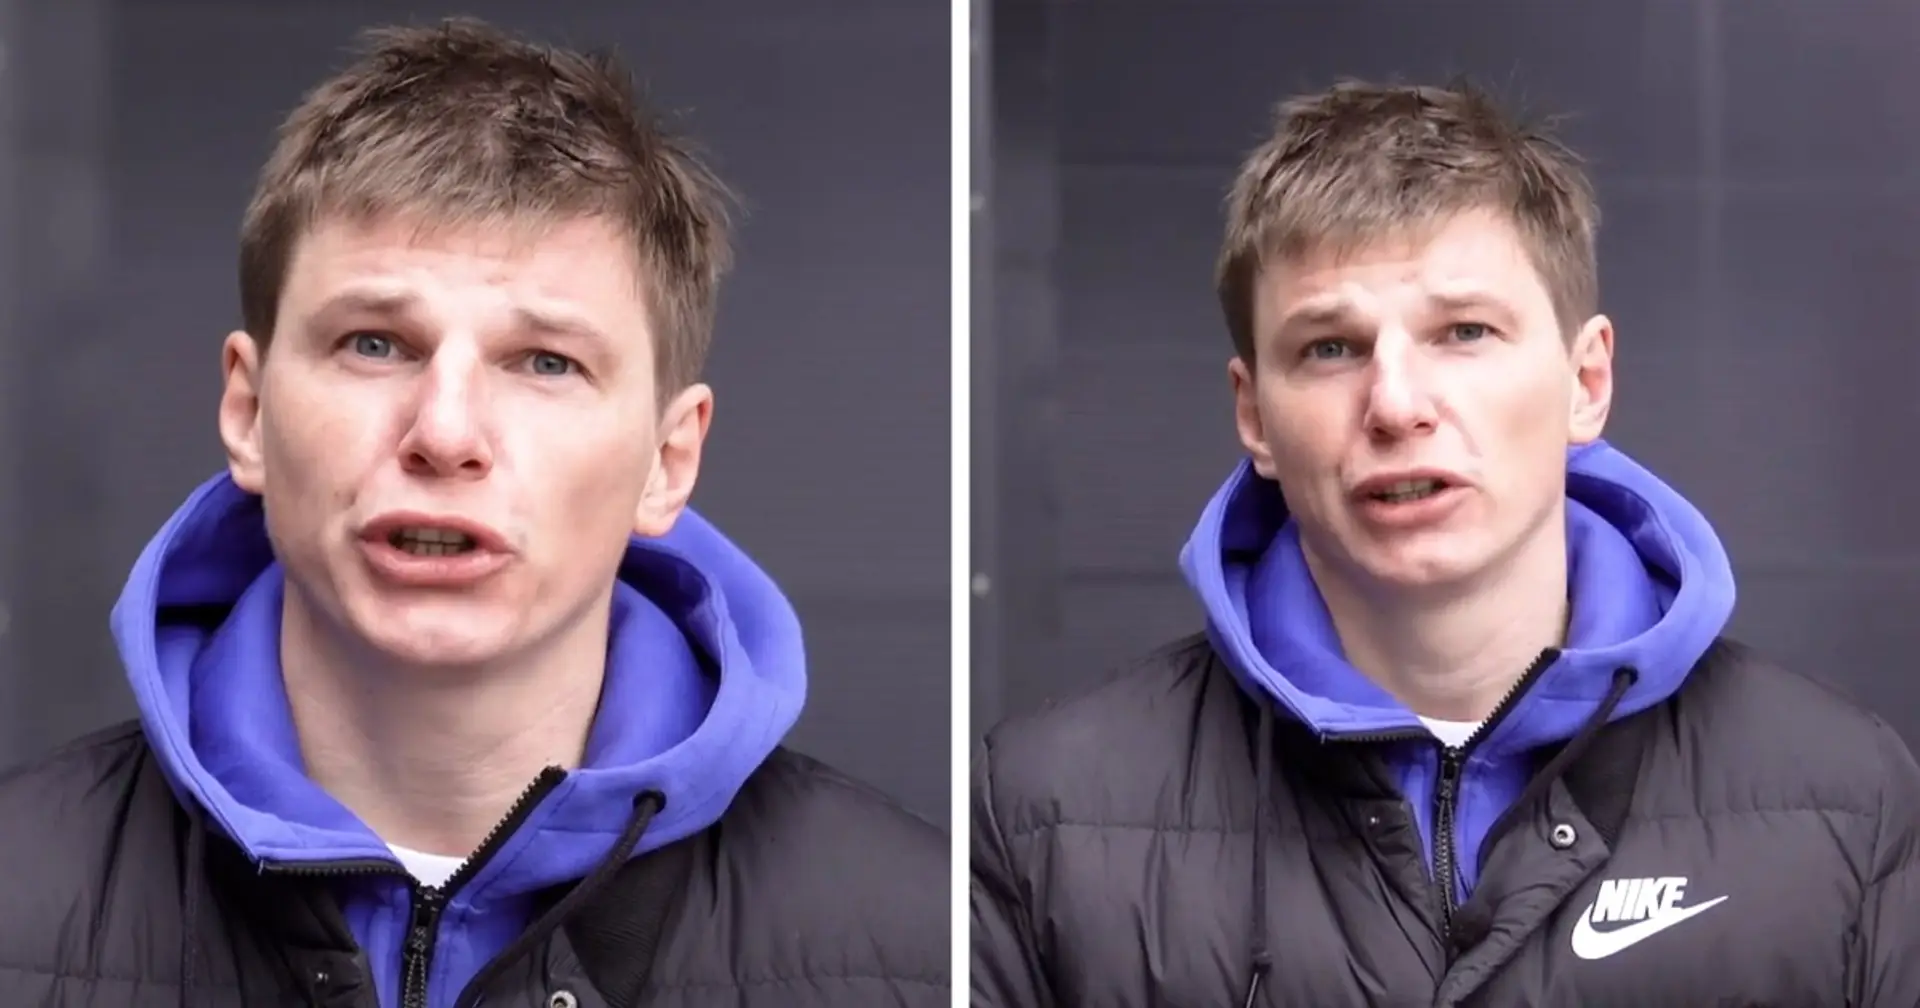 'Read books, do homework, don't be lazy': ex-Arsenal star Arshavin gives advice on how to stay busy in quarantine (video)